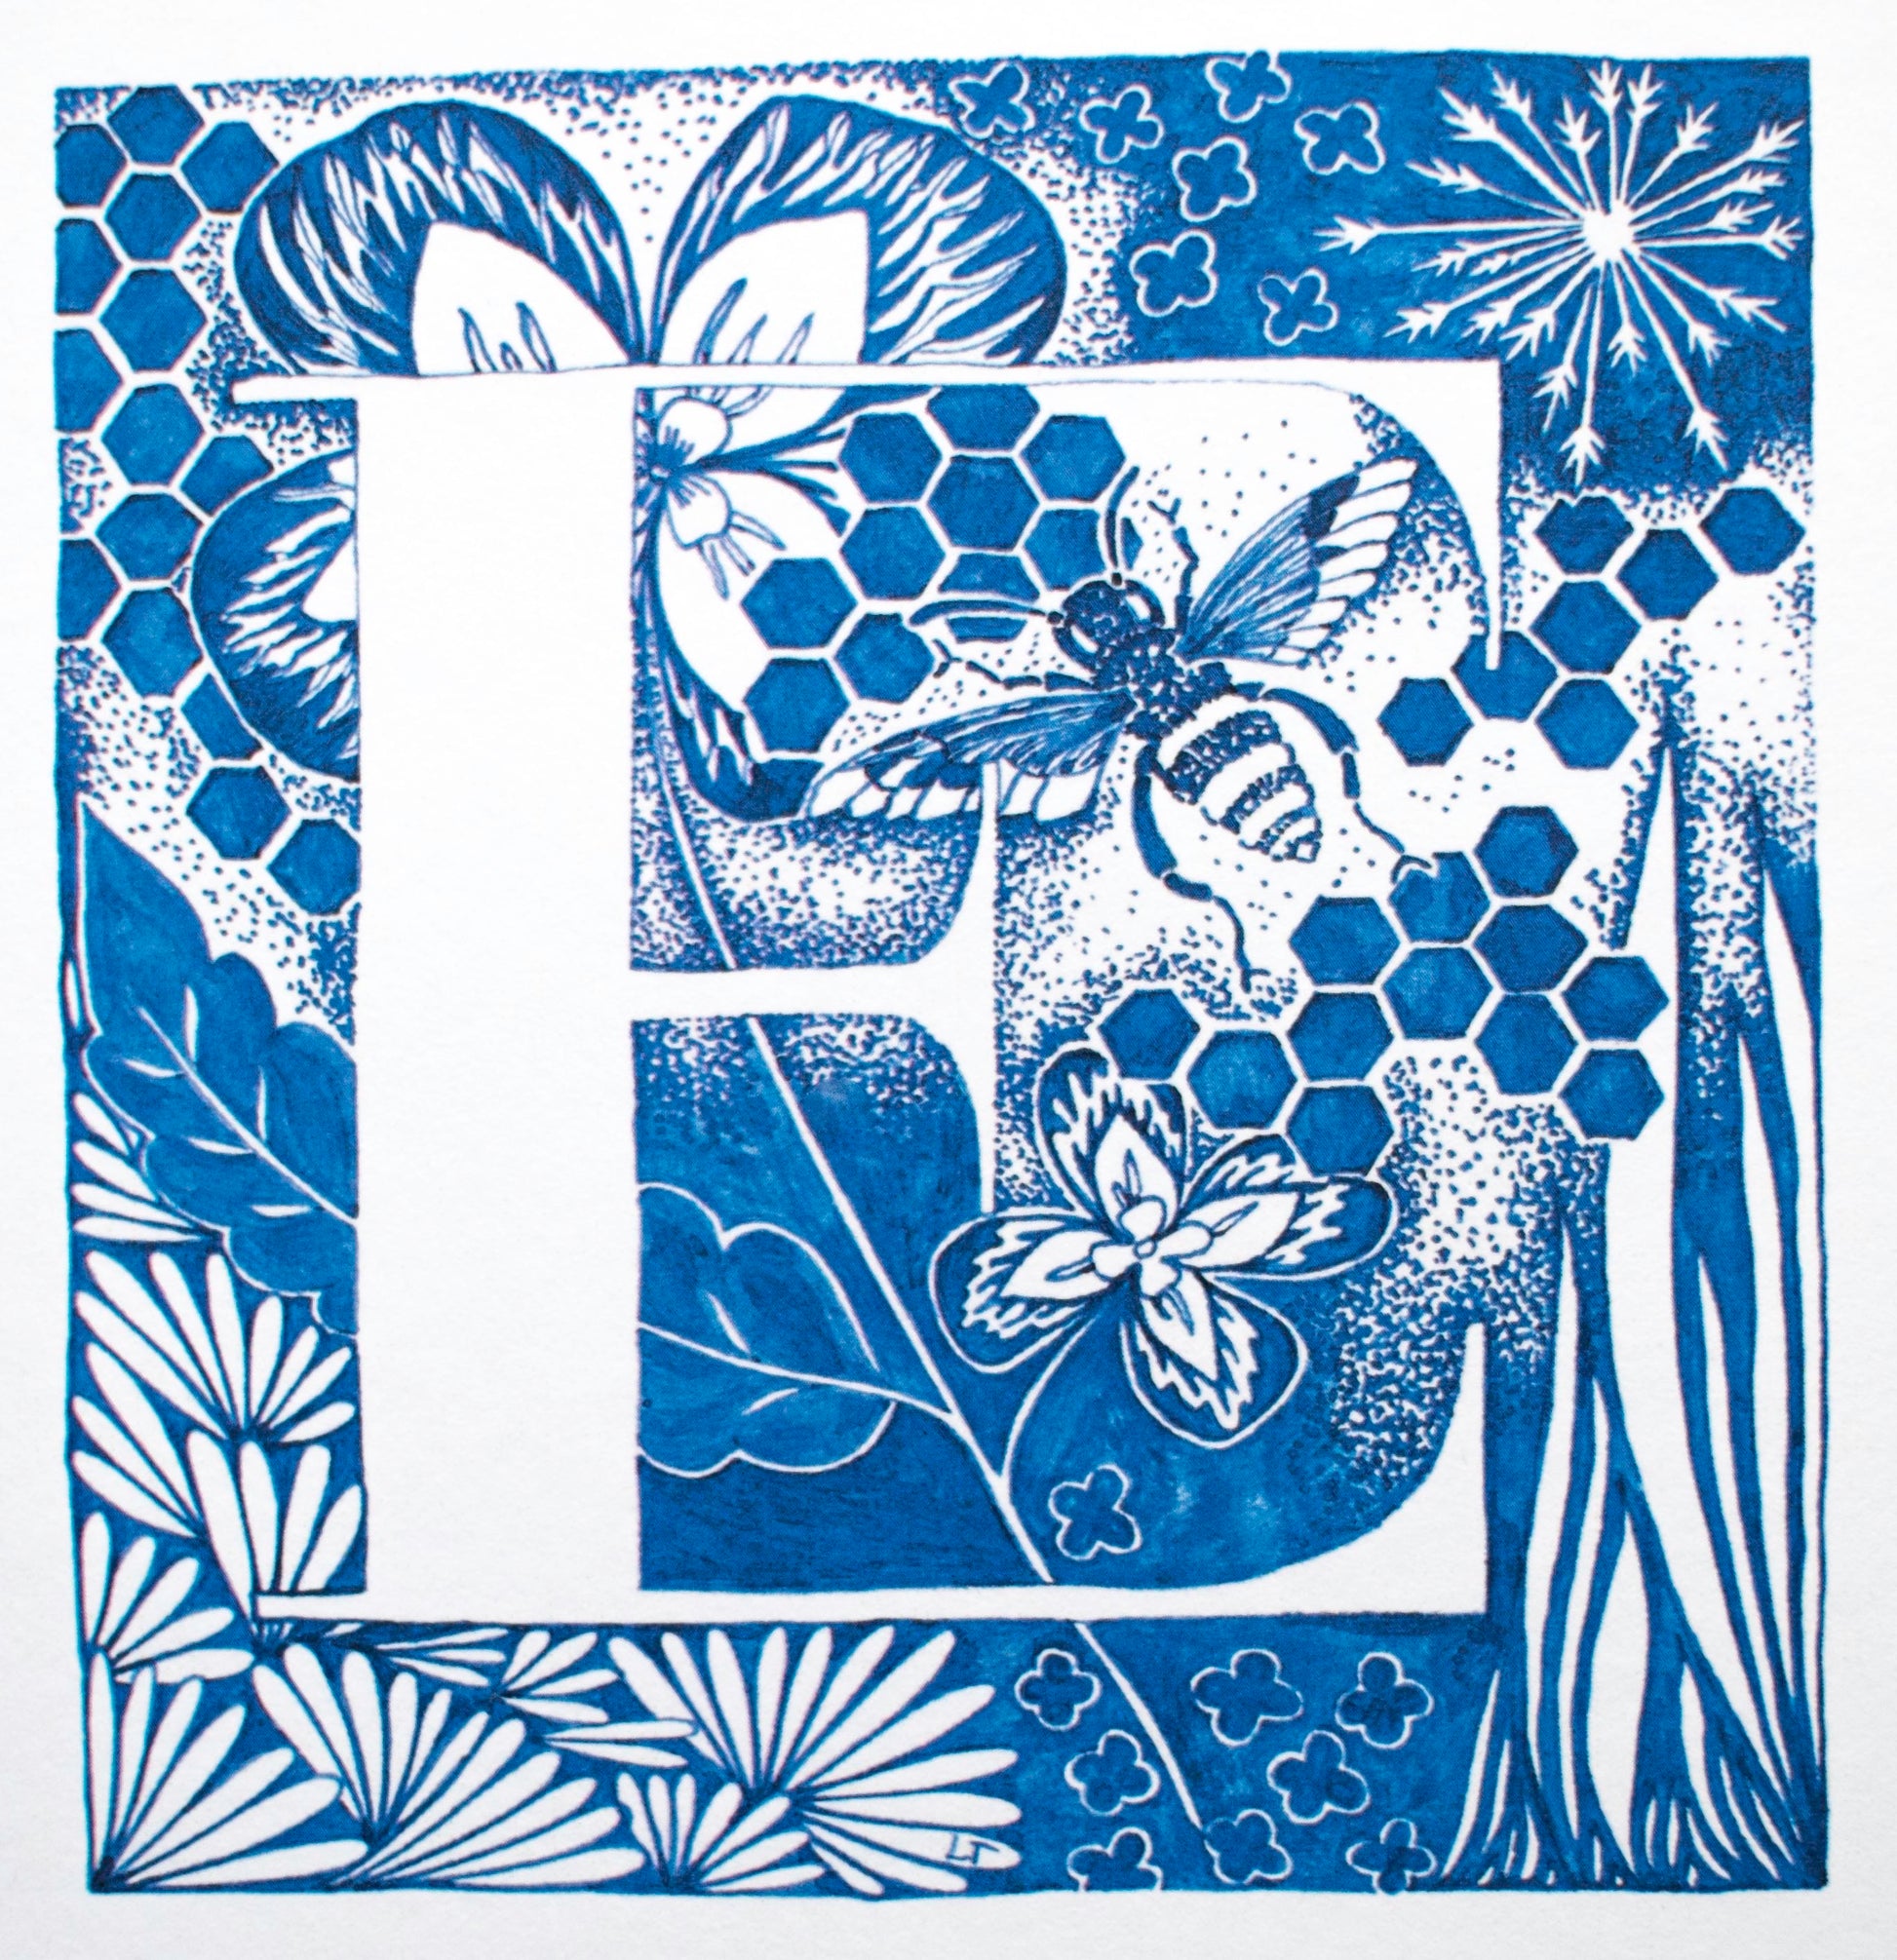 Limited Edition Print of Monogram E, letter print, blue ink, floral, insects details, enluminure, miniature, laurateodoriart